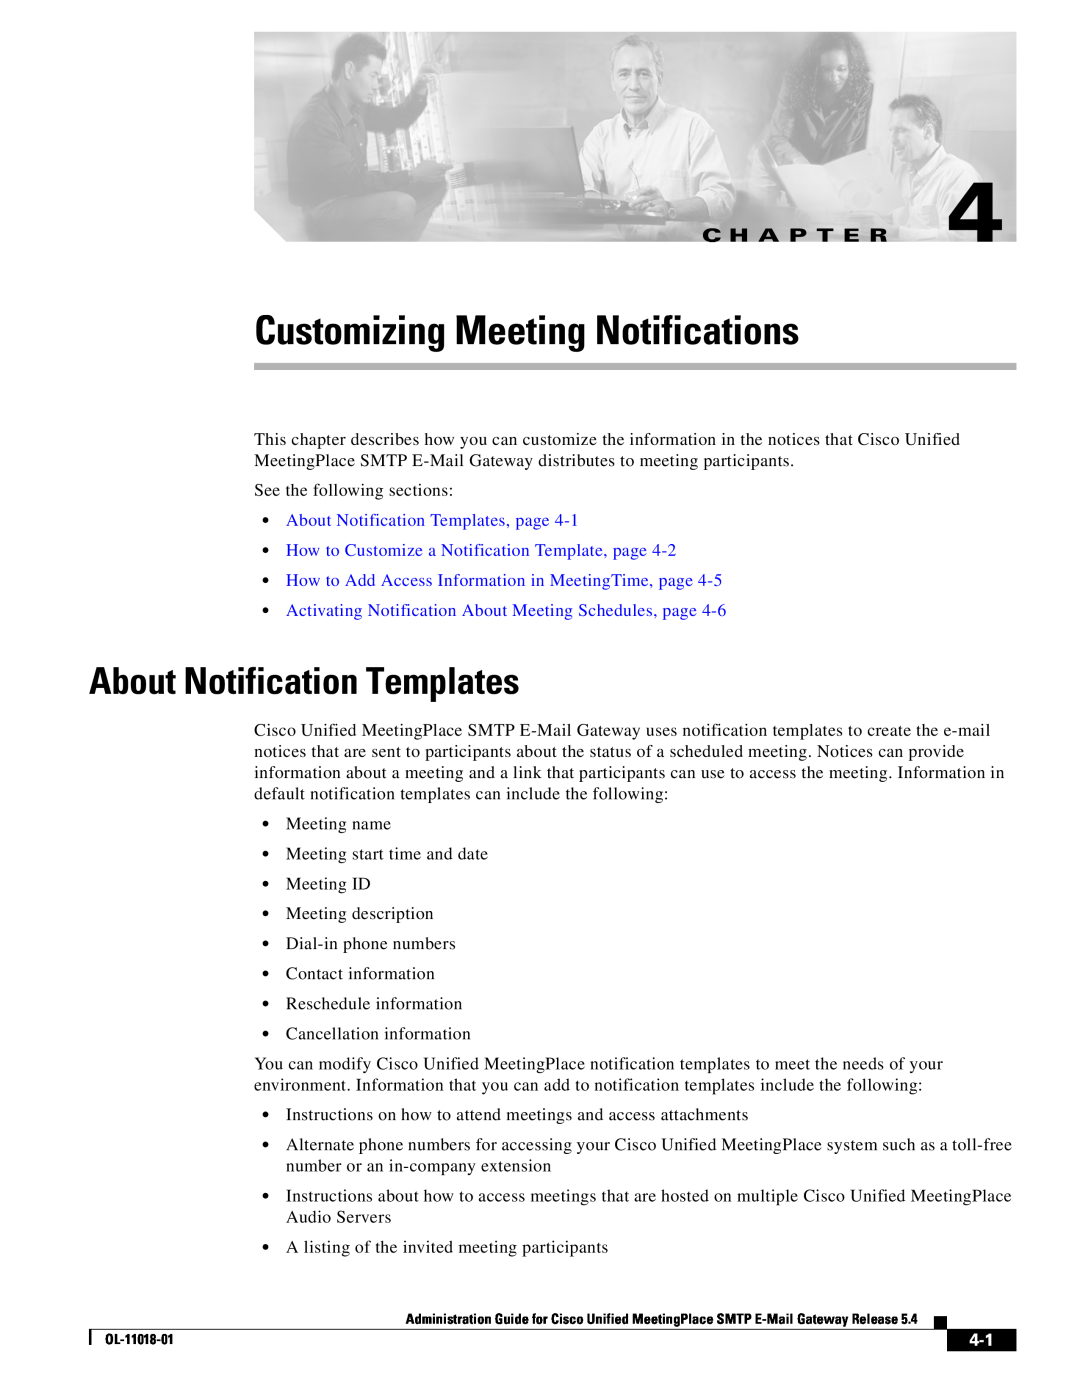 Cisco Systems SMTP manual Customizing Meeting Notifications, C H A P T E R, About Notification Templates, page 